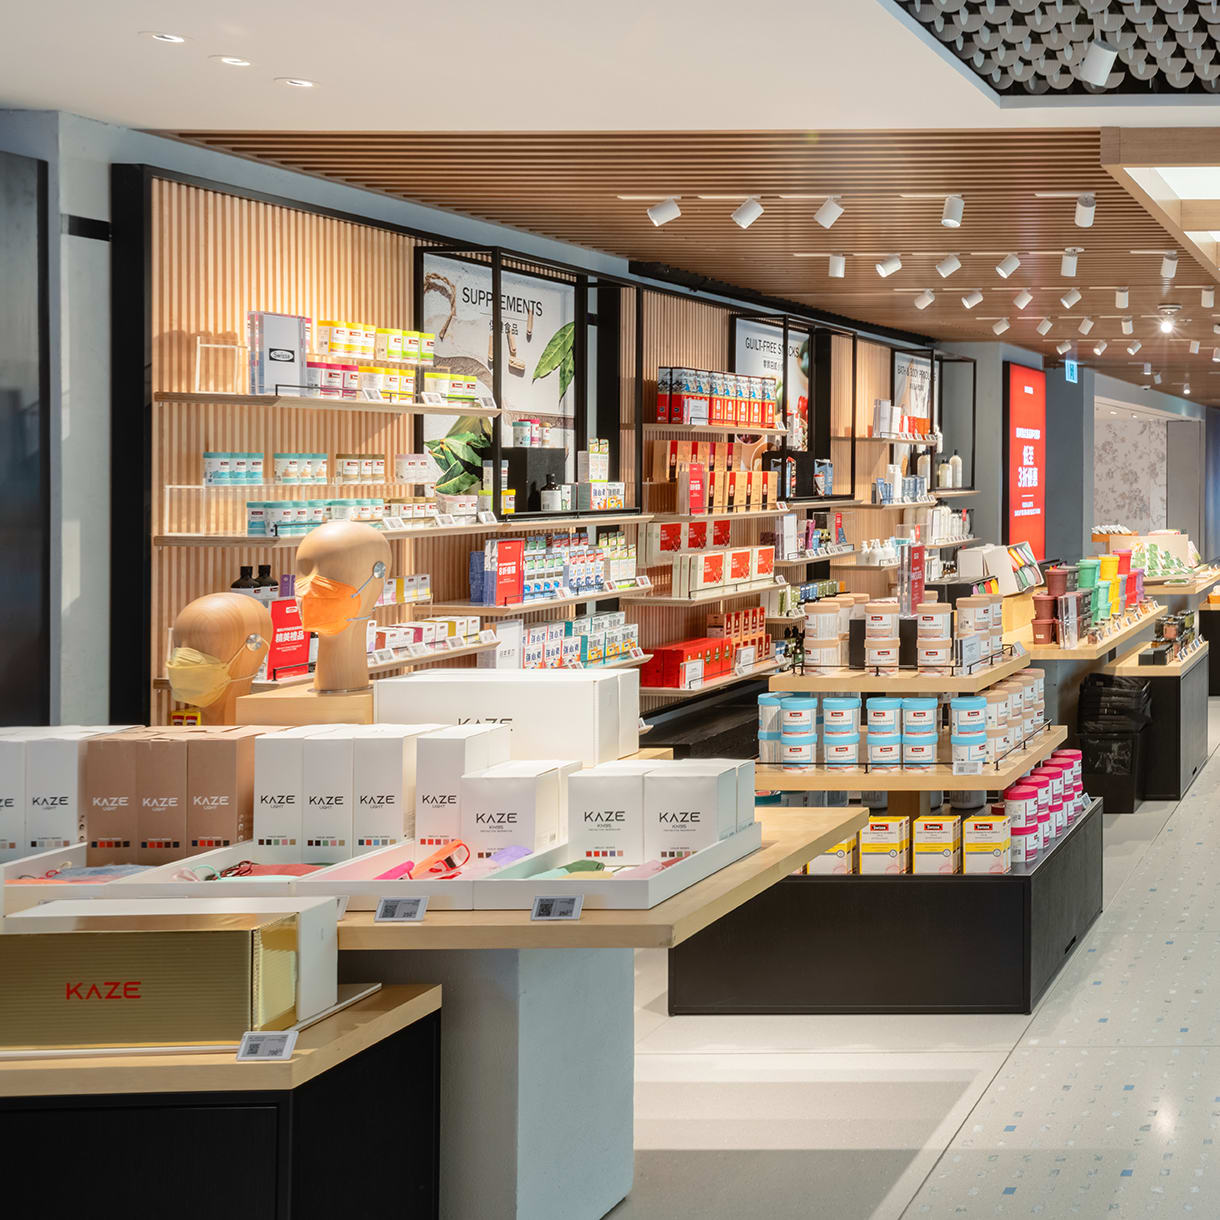 DFS Group completes HKIA duty-free upgrade - Inside Retail Asia